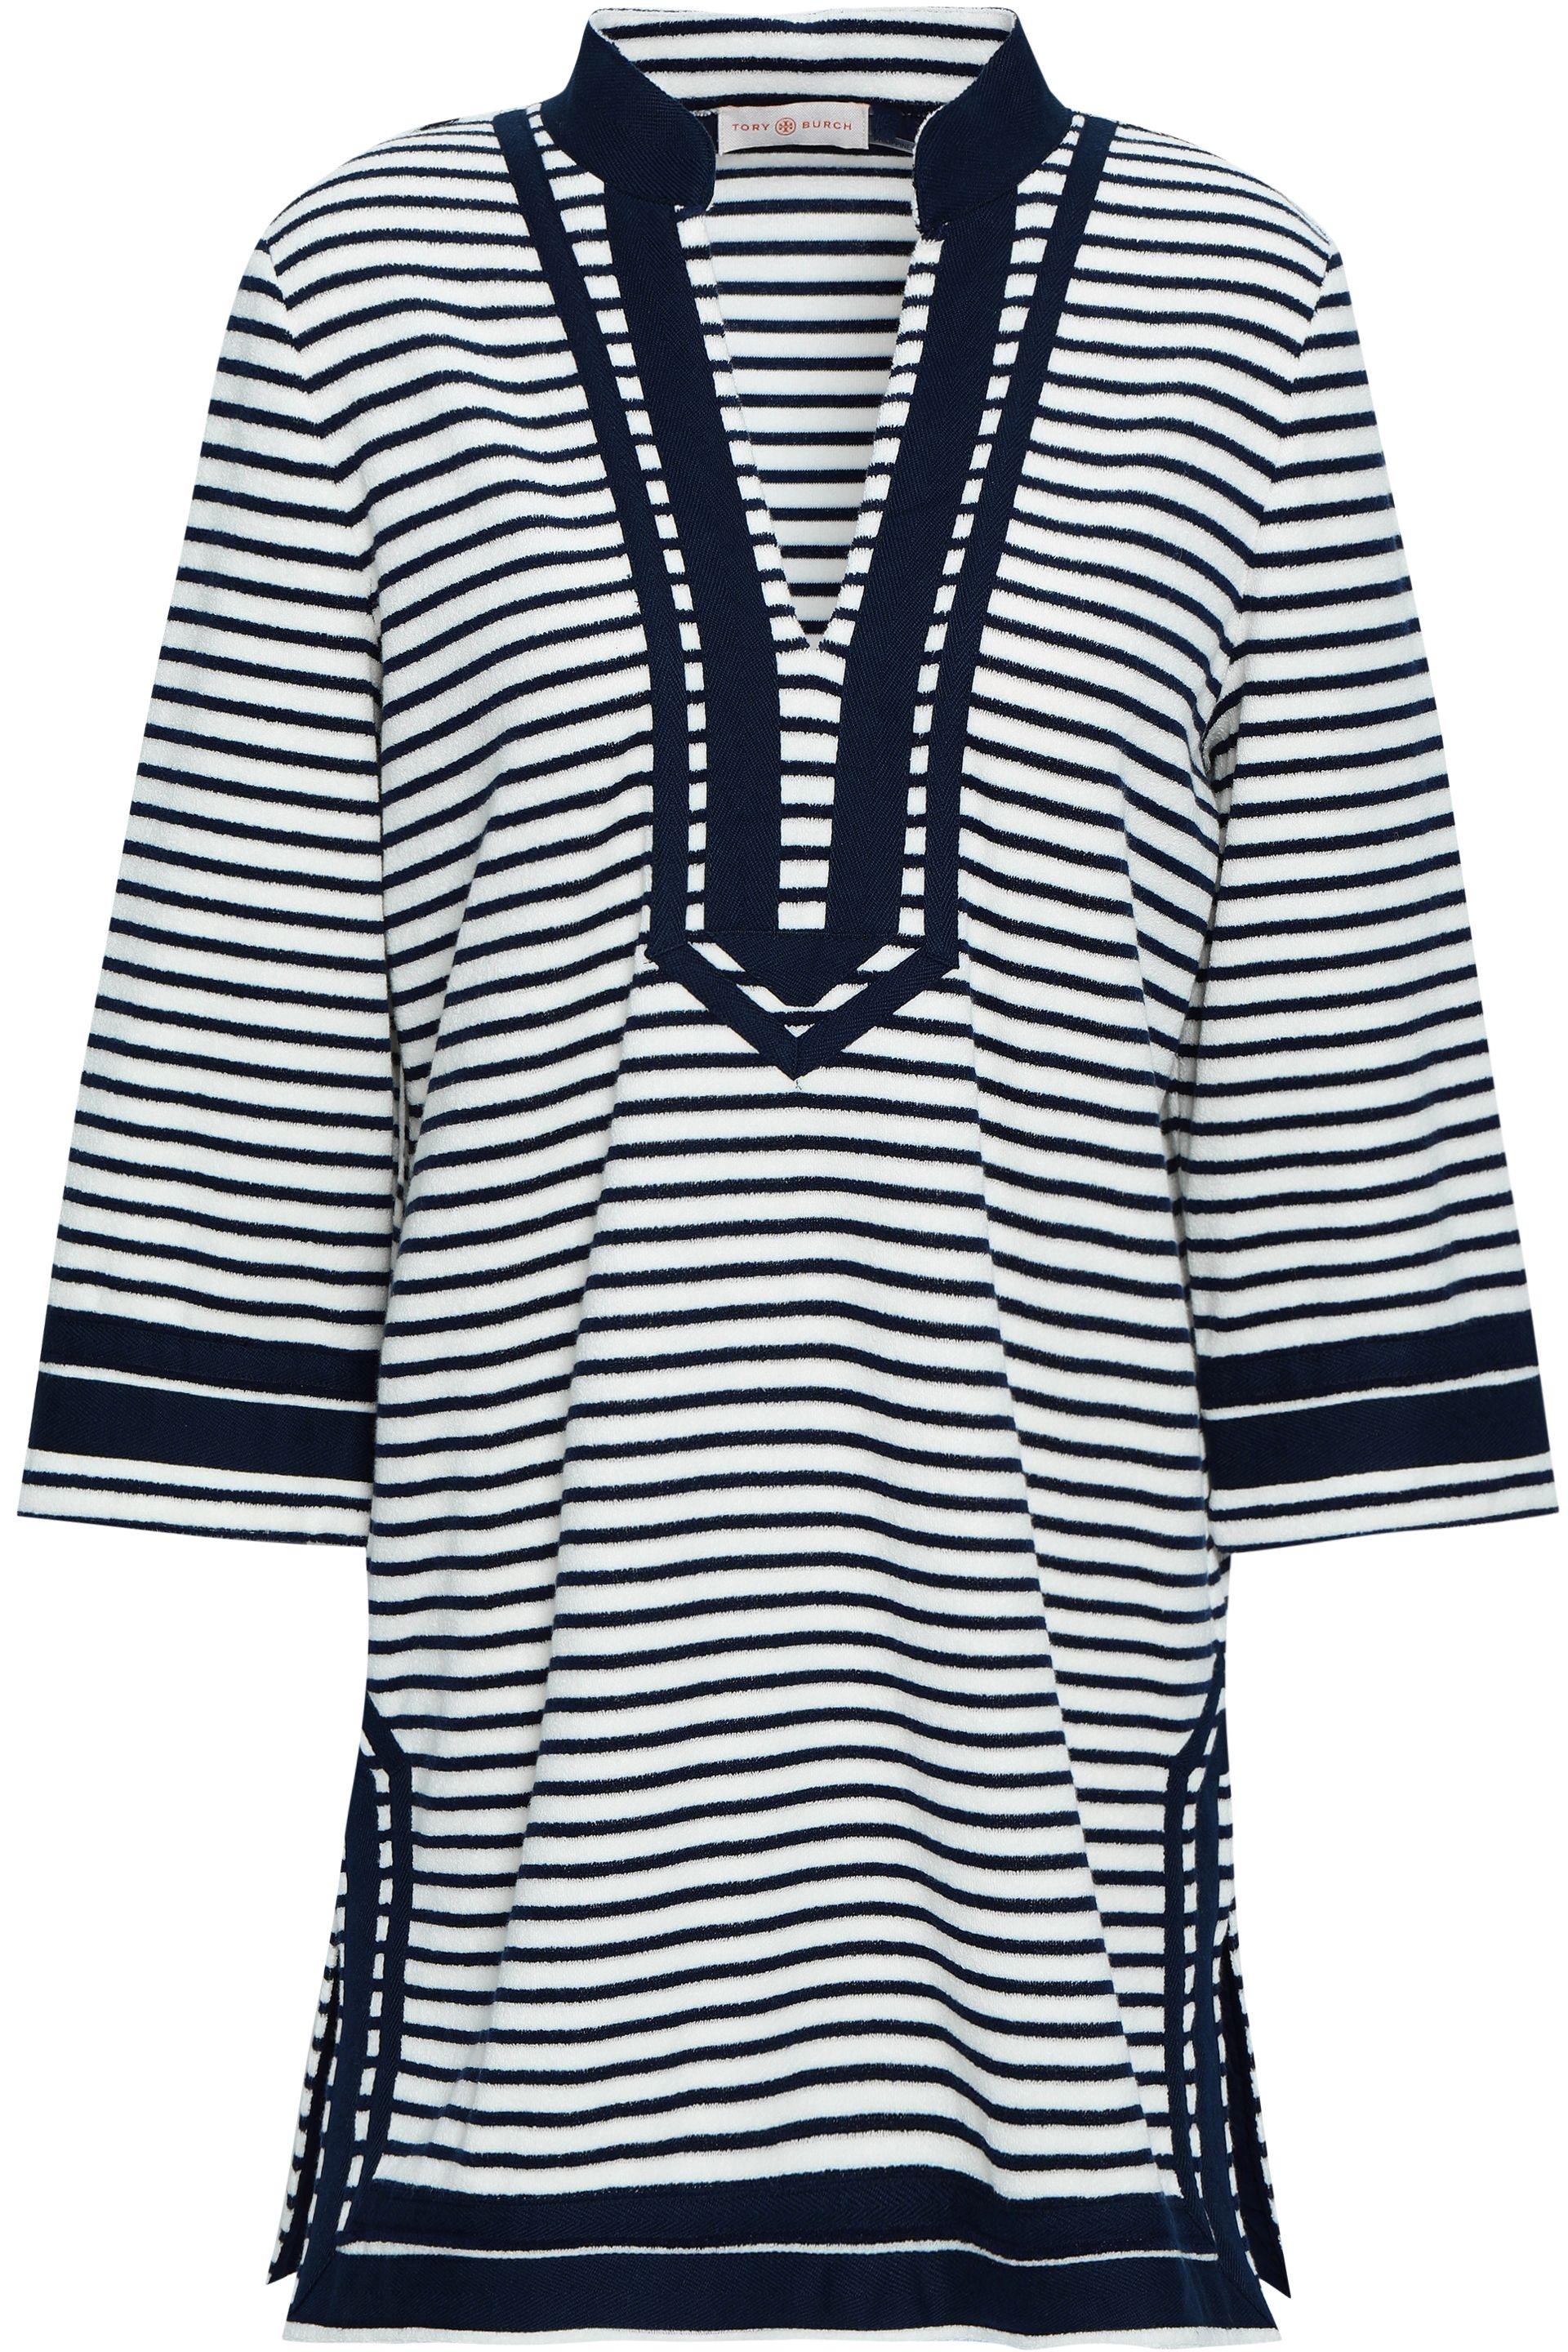 Tory Burch Striped Cotton-blend Terry Top Navy in Blue - Lyst